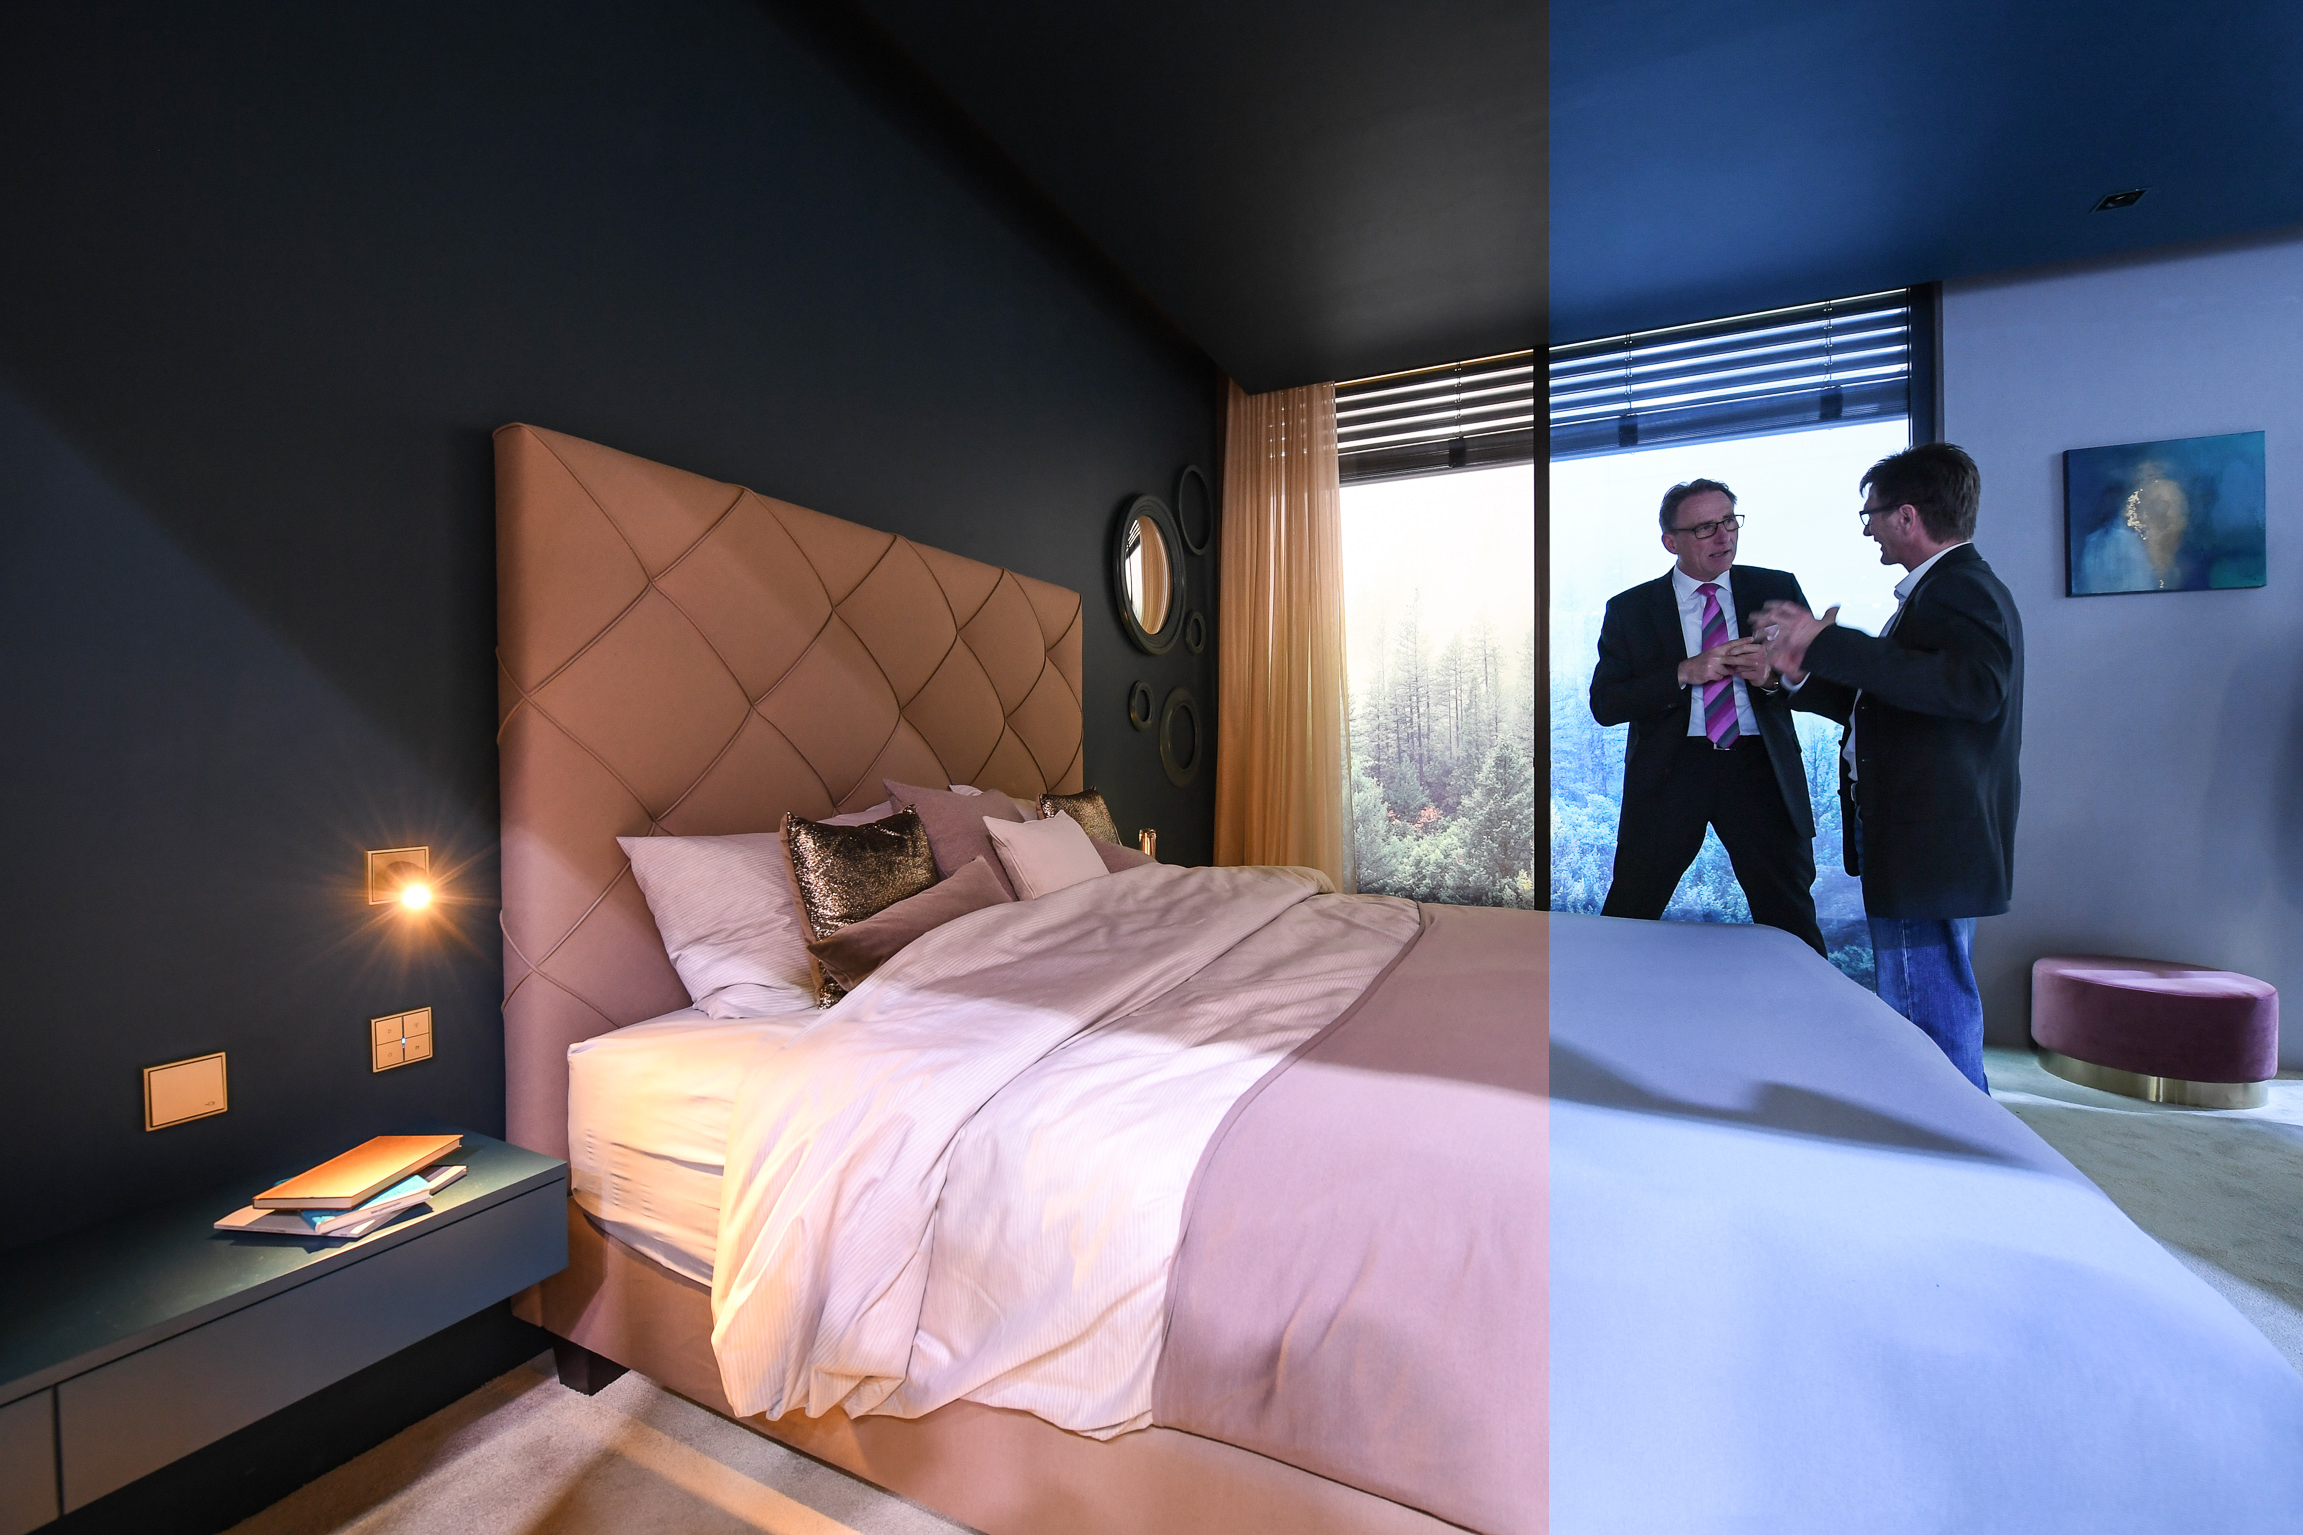 HCL concepts also cater for a daylight-like atmosphere and influence guests’ feeling of wellbeing in hotels.